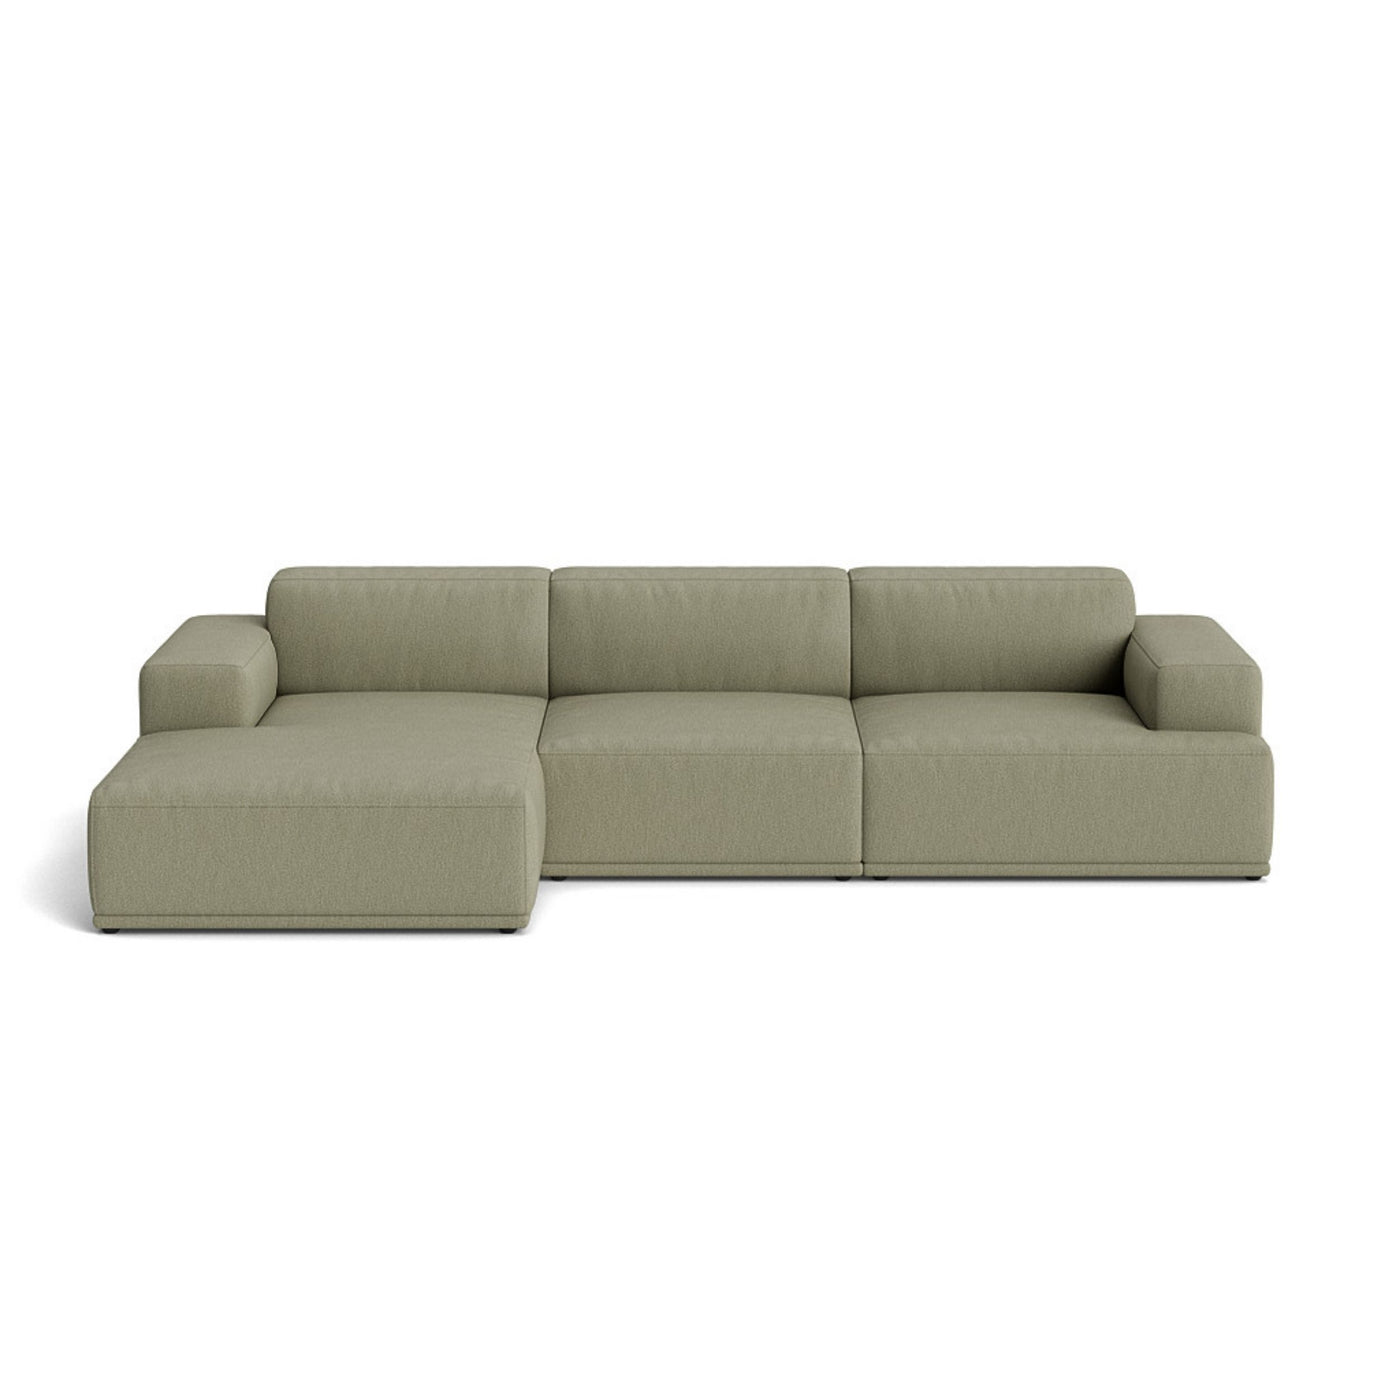 Muuto Connect Soft Modular 3 Seater Sofa, configuration 2. Made-to-order from someday designs. #colour_clay-15